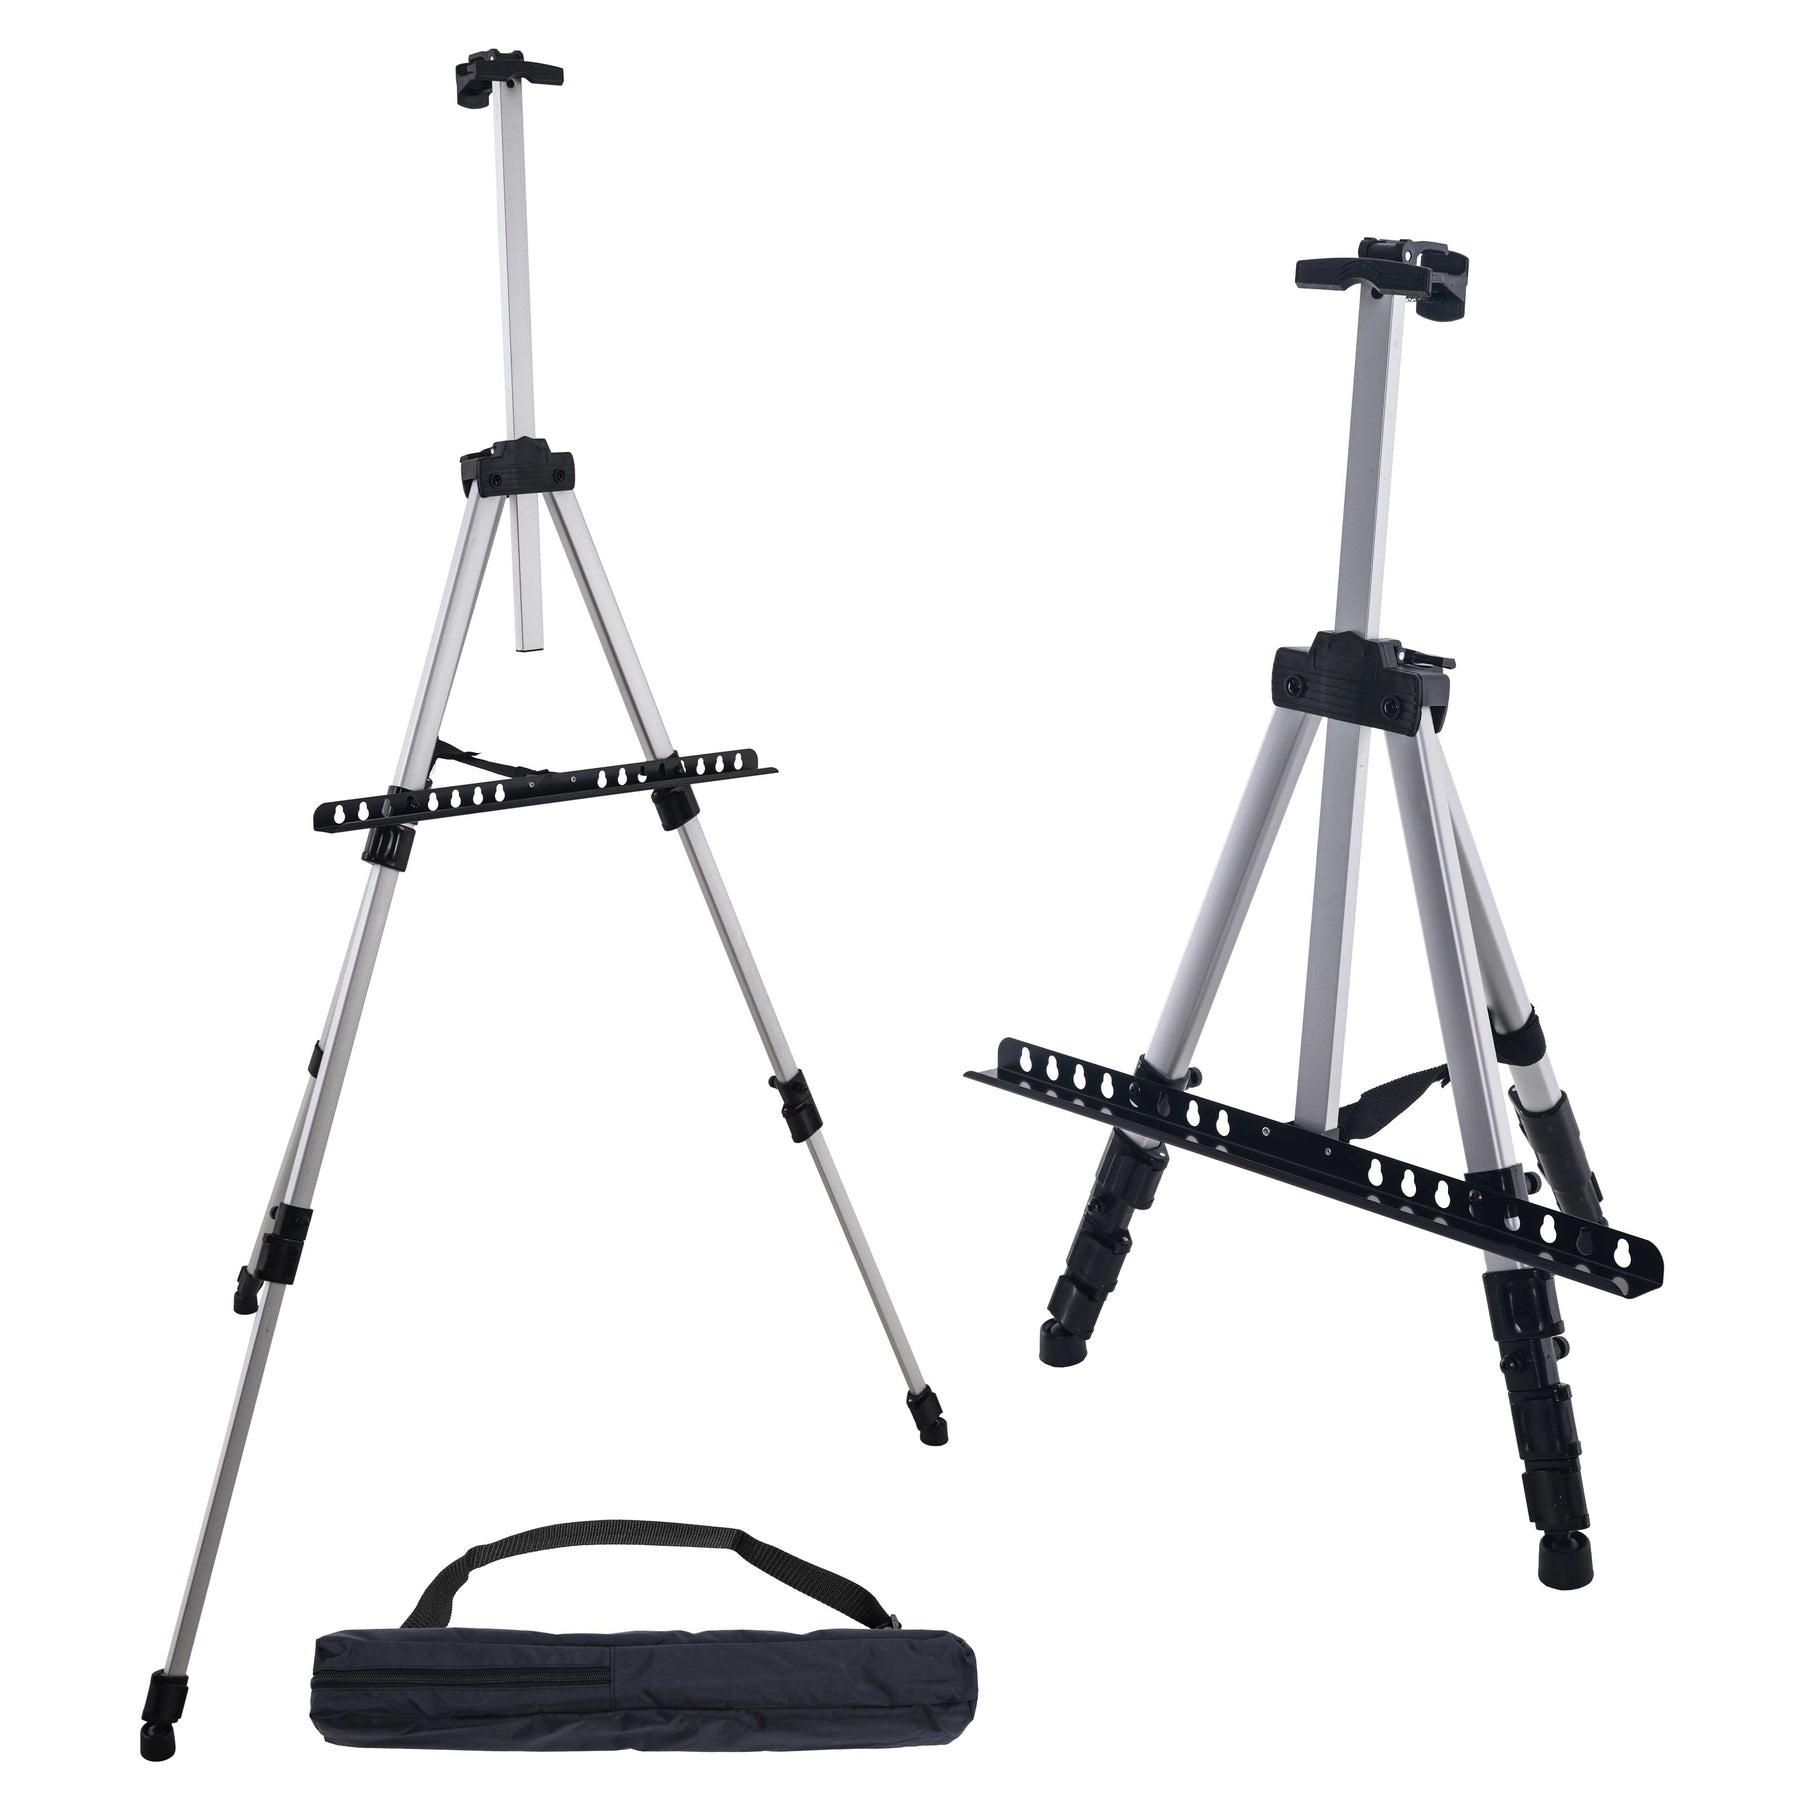 66 Reinforced Artist Easel Stand, Extra Thick Aluminum Metal